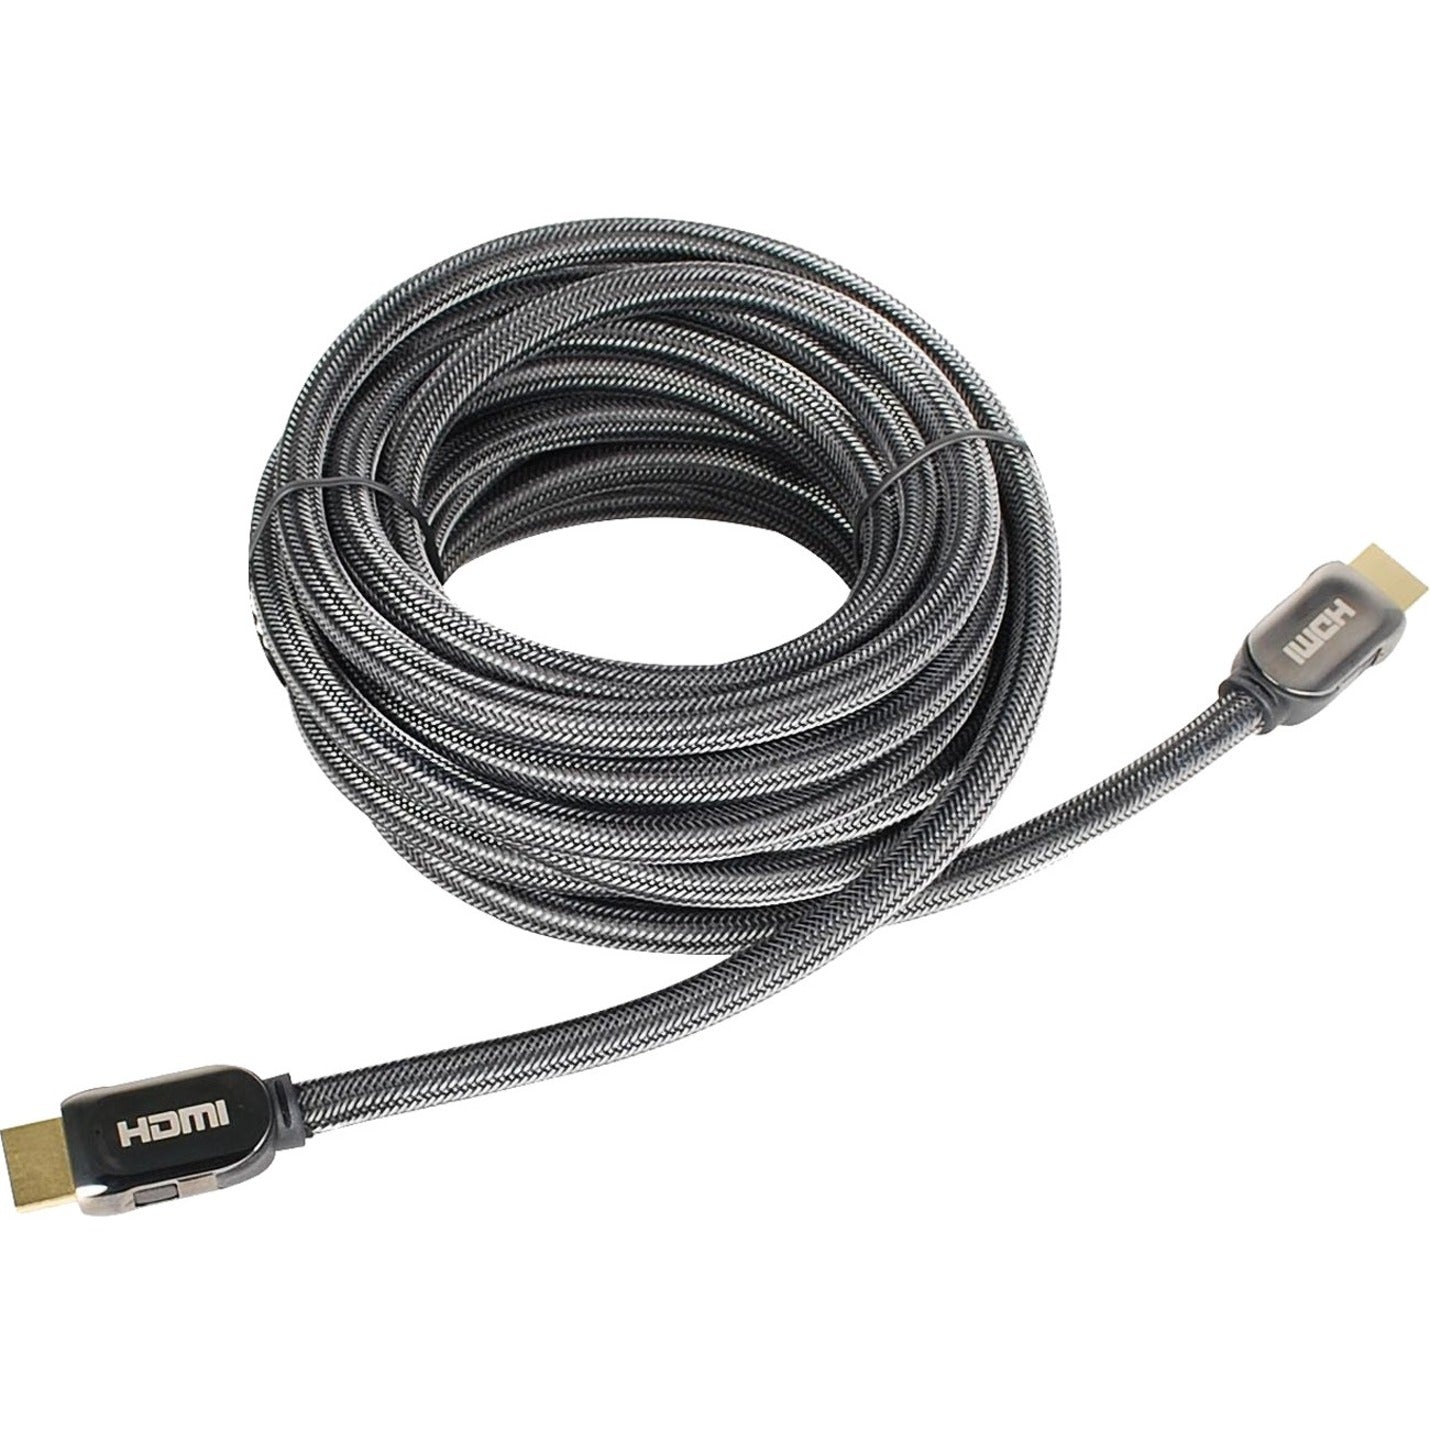 SIIG CB-H20812-S1 ProHD with Ethernet - 2M HDMI Cable, 4K Resolution, 3D Video Support